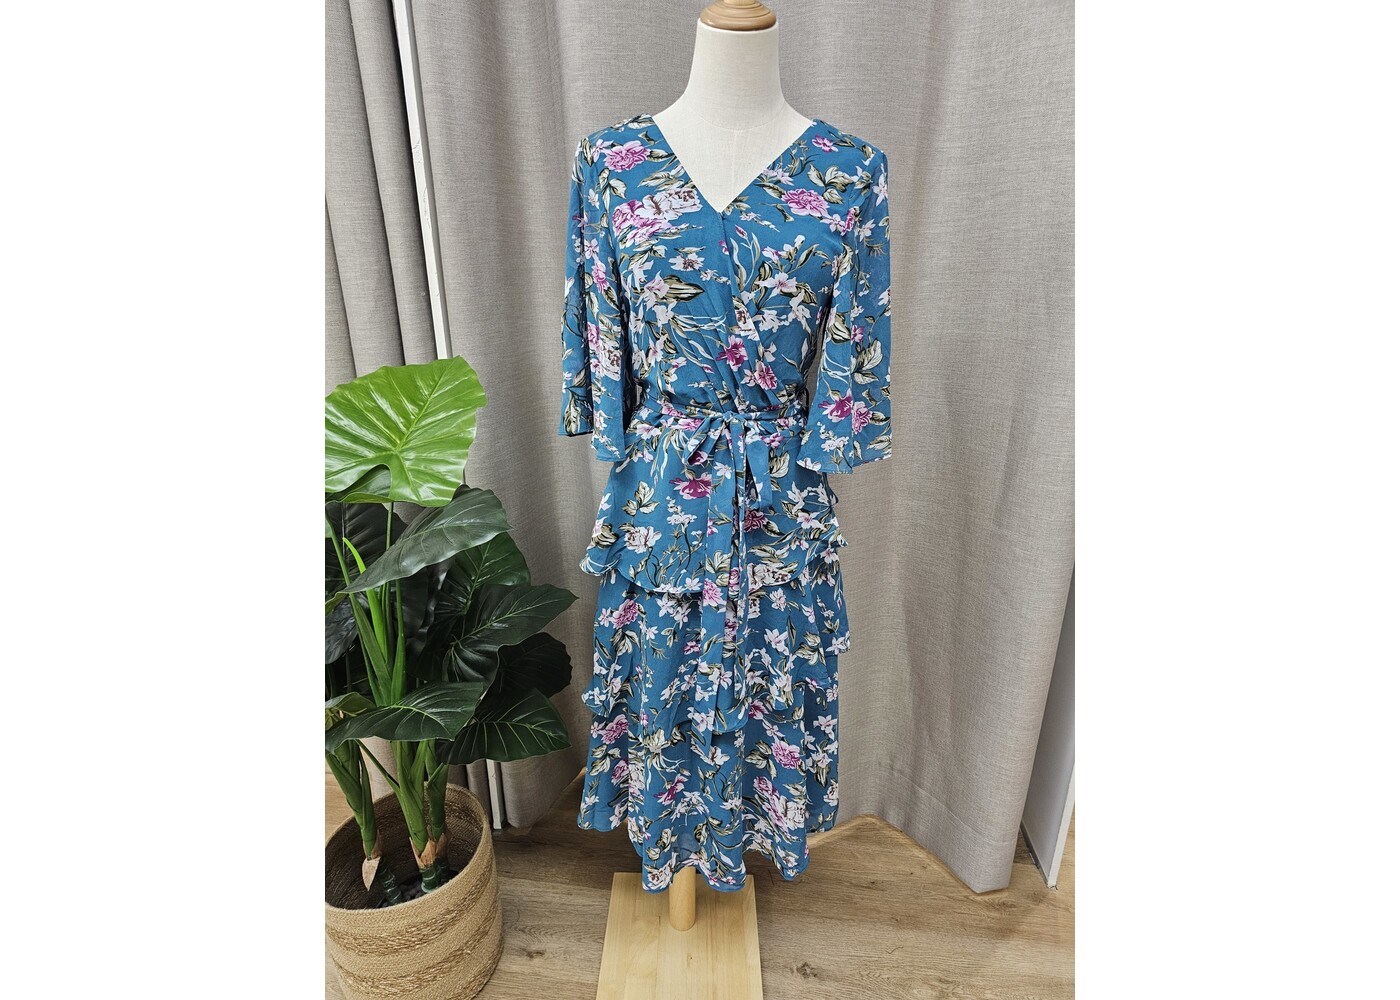 Miss Anne Winona Floral Cocktail Dress